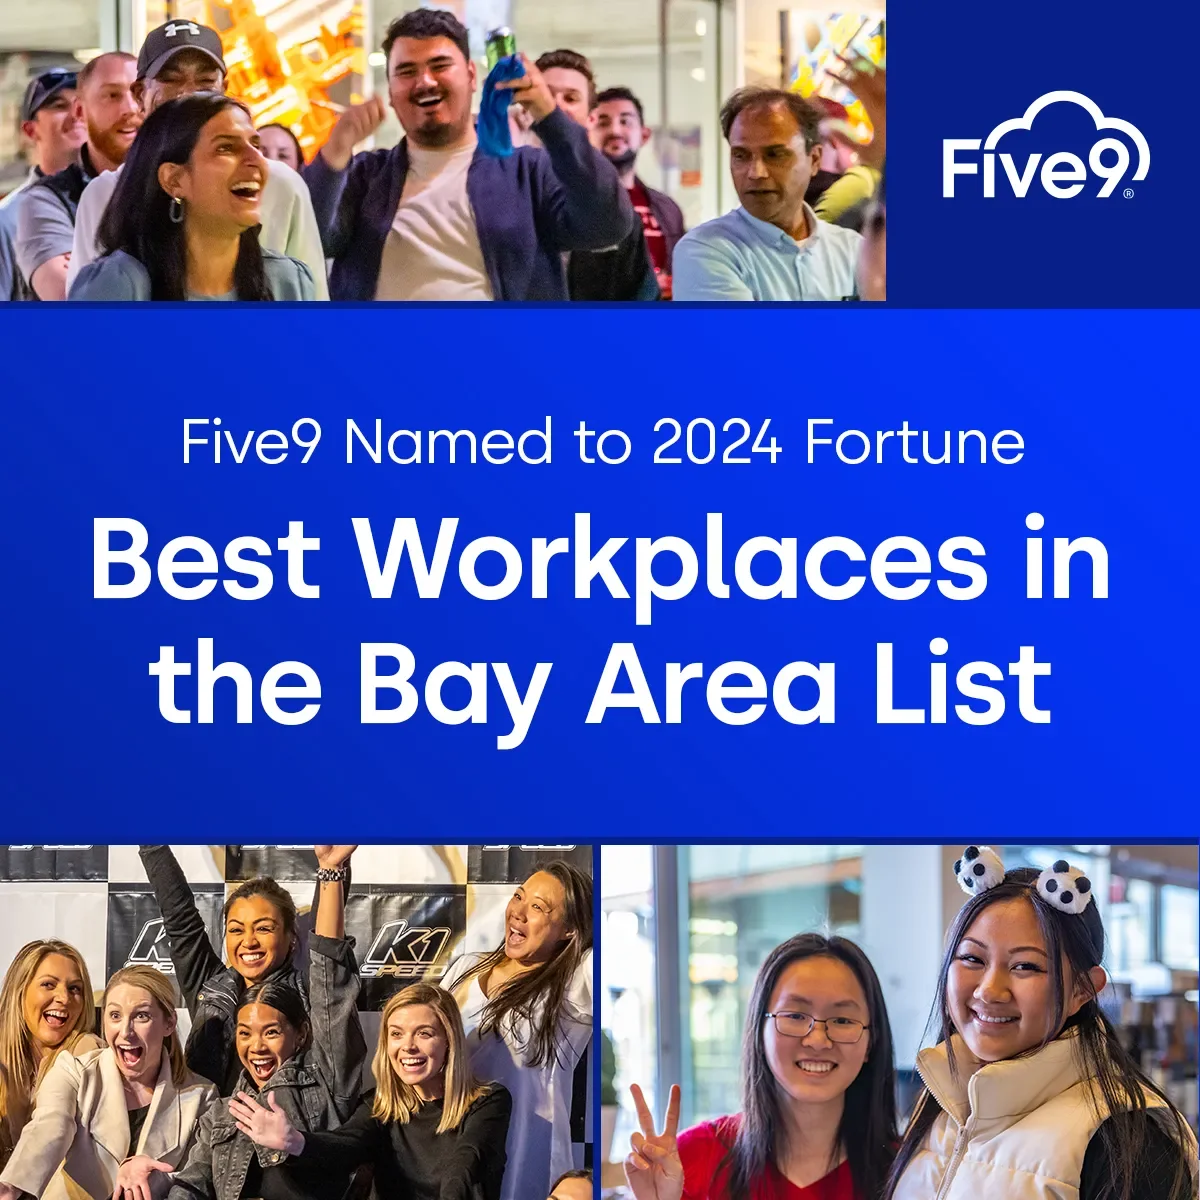 Five9 Named to 2024 Fortune Best Workplaces in the Bay Area List